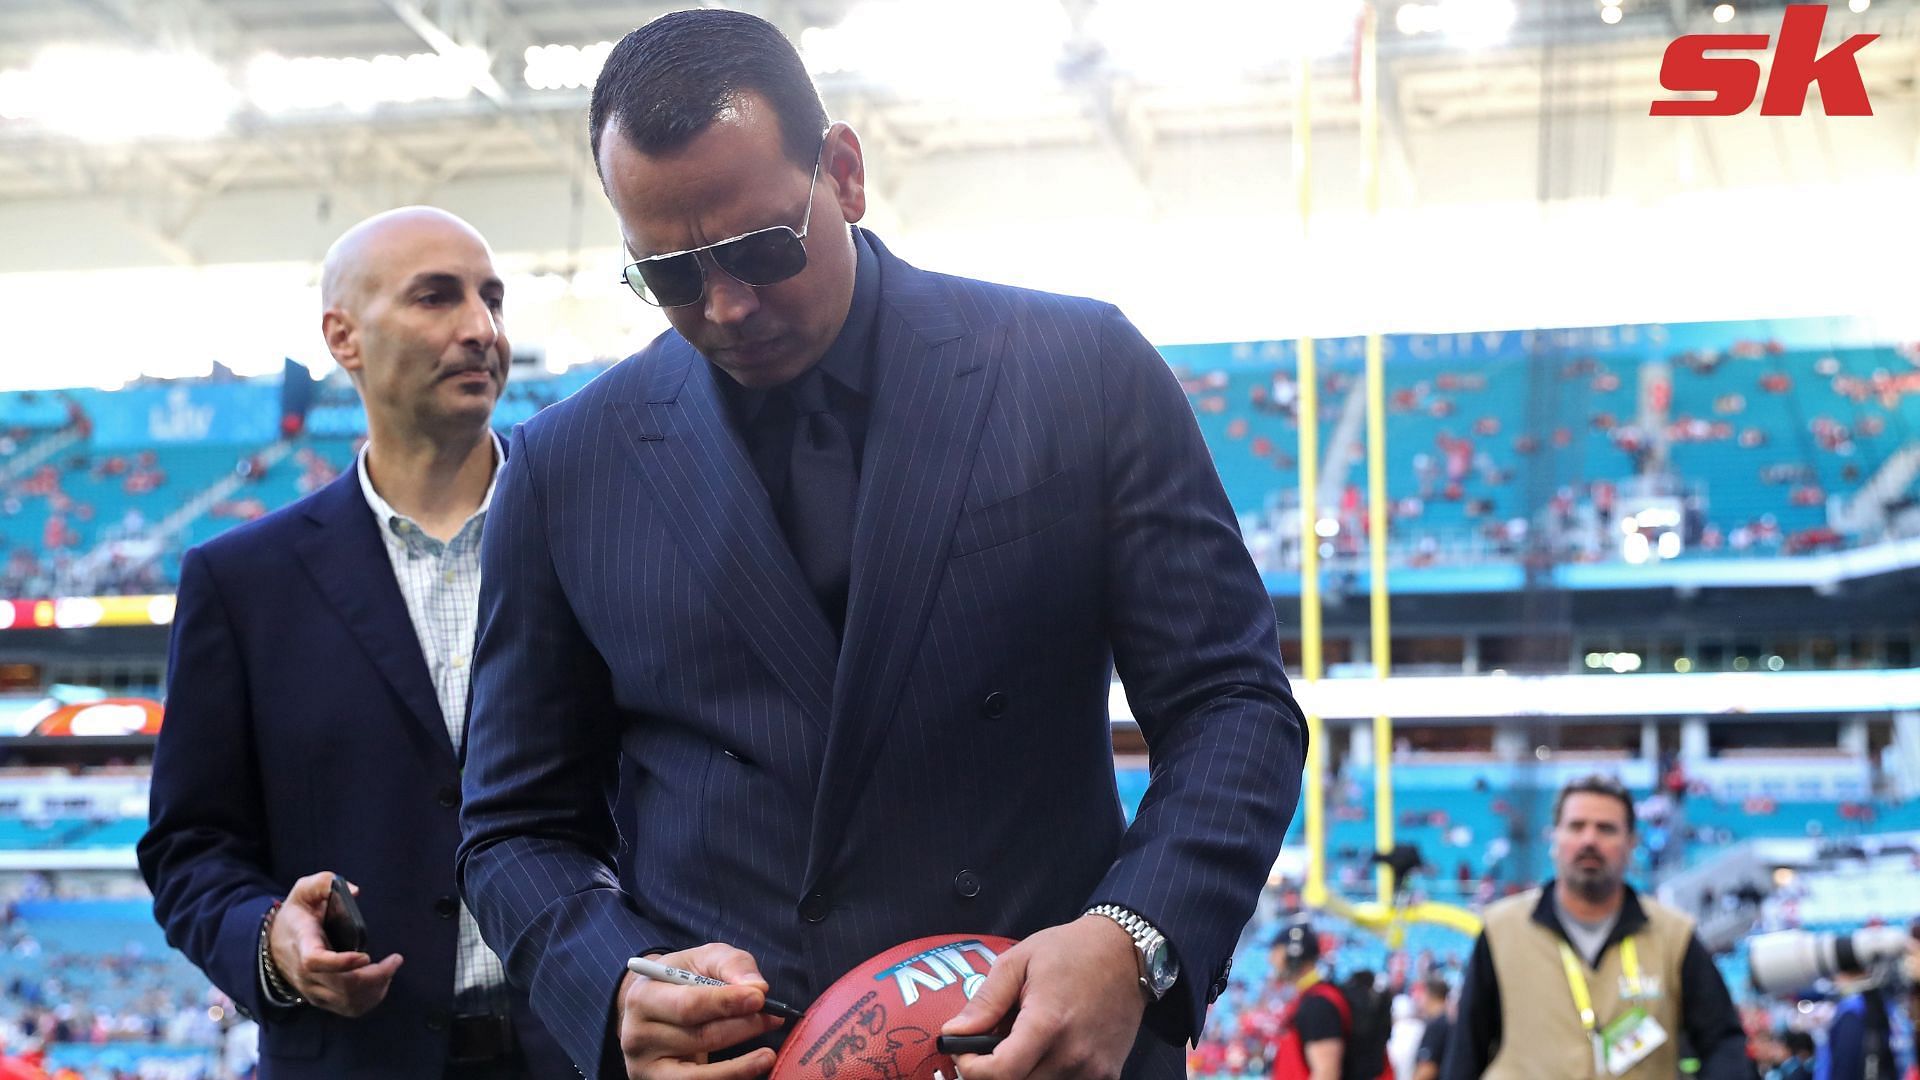  Alex Rodriguez was disappointed with how the Biogenesis scandal handed him the largest suspension in league history